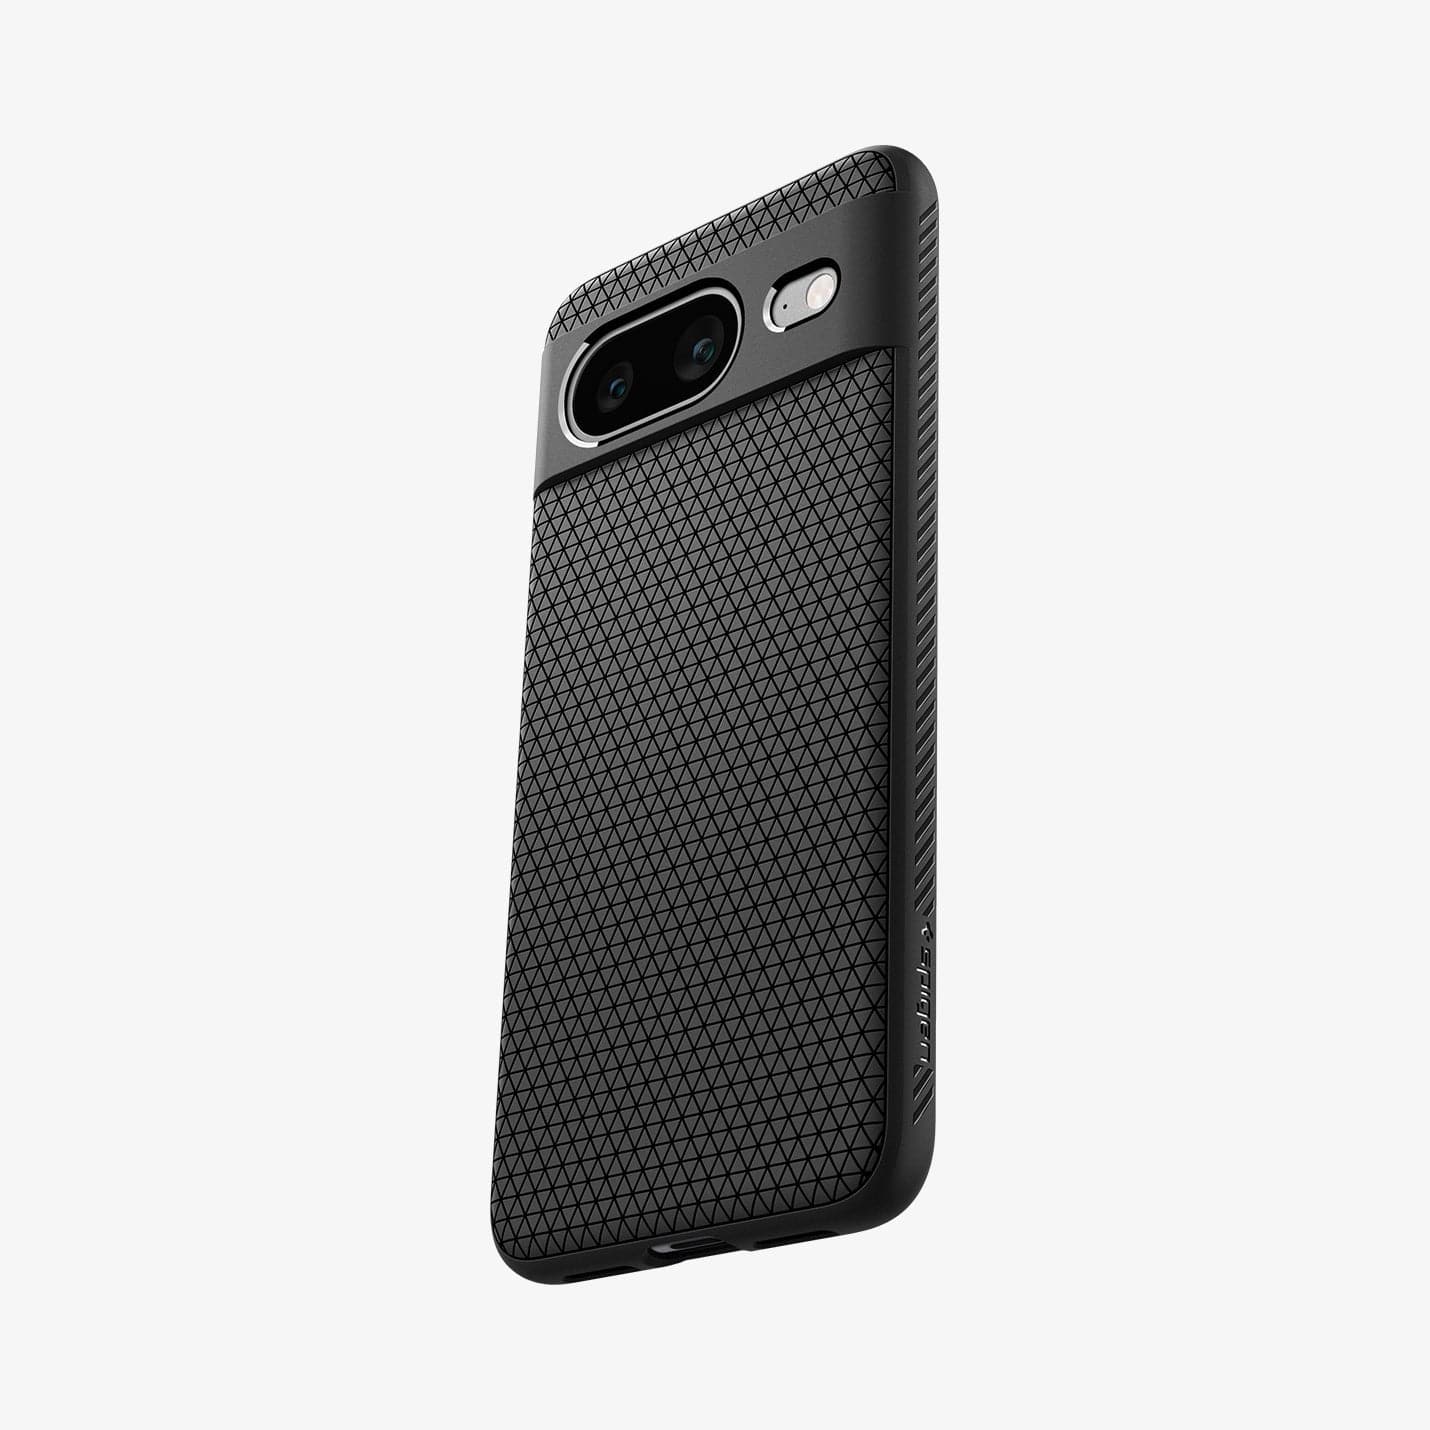 ACS06274 - Pixel 8 Case Liquid Air in Matte Black showing the back, partial side and bottom